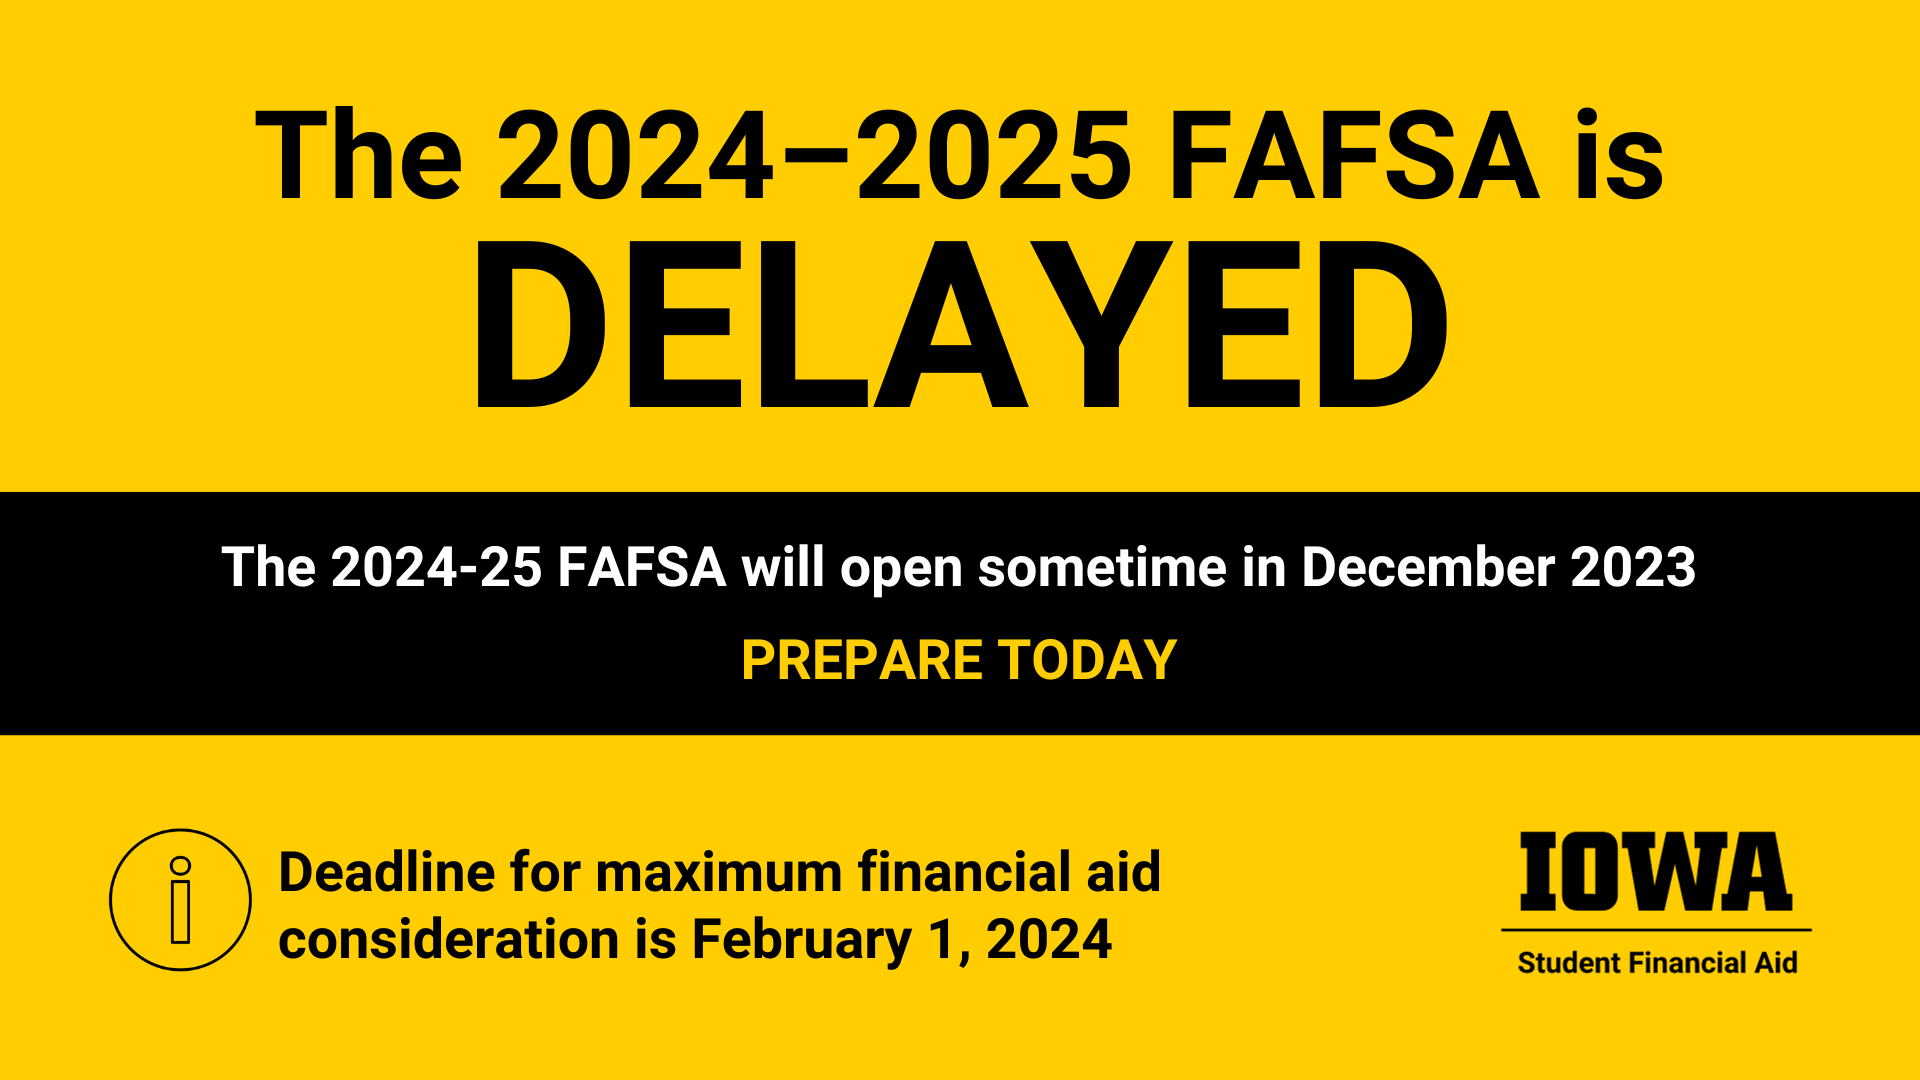 The 2024-2025 FAFSA is delayed. It will open sometime in December. Prepare Today. Deadline for maximum aid consideration is February 1, 2024